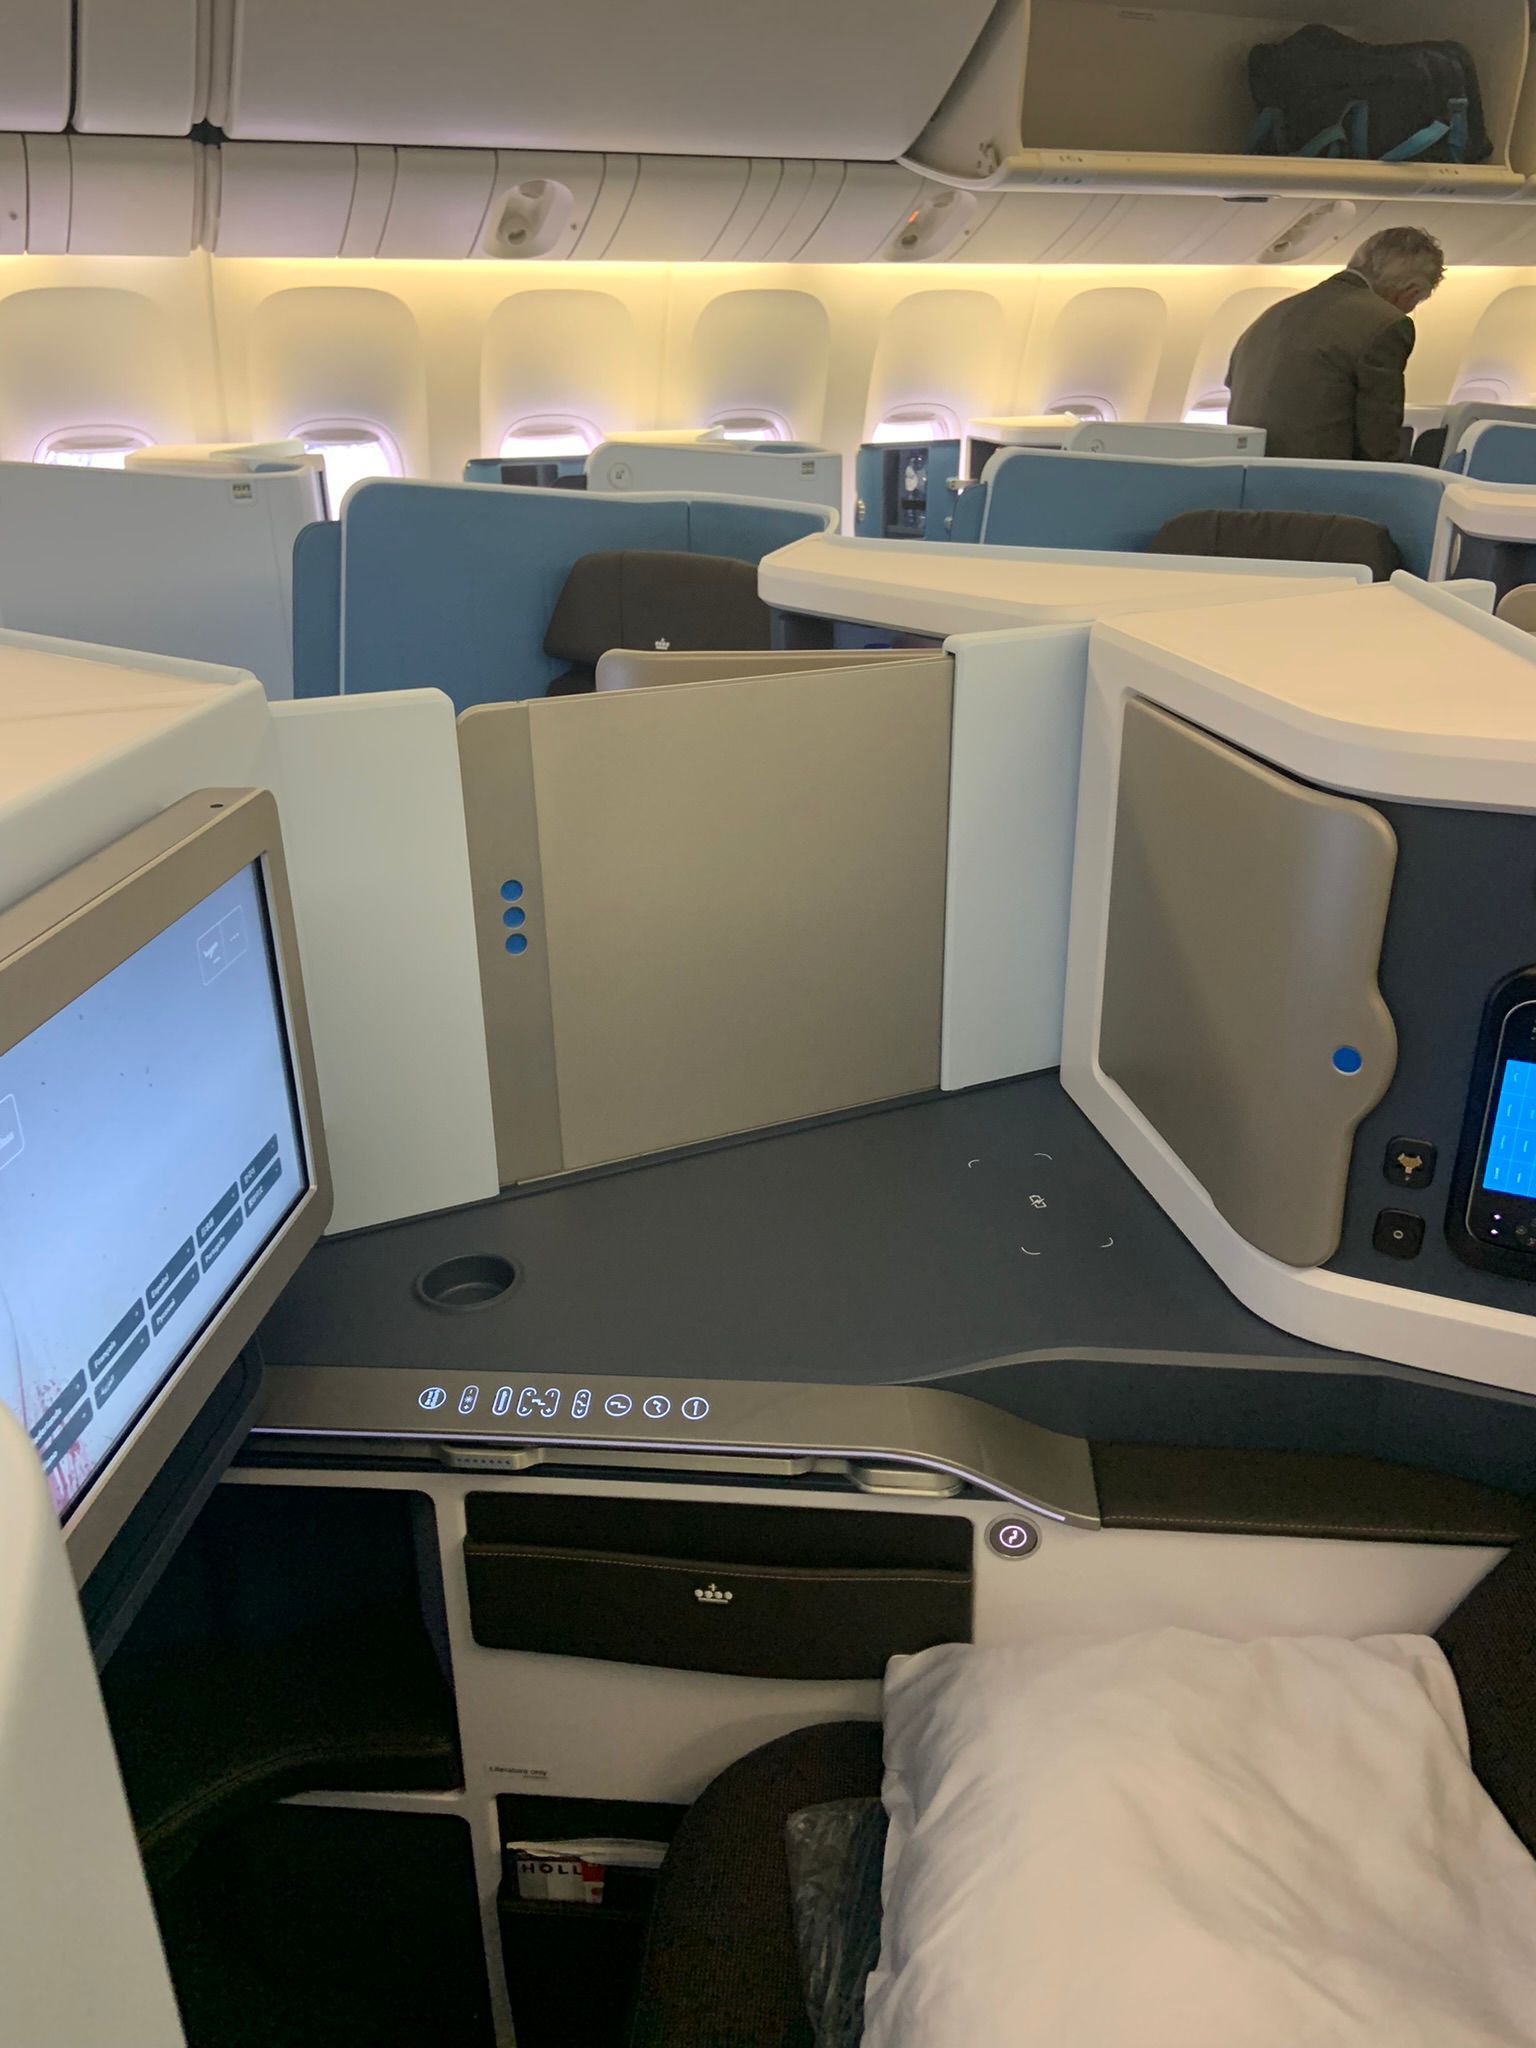 KLM Reveals Beautiful New Enterprise Class Seat For Boeing 777